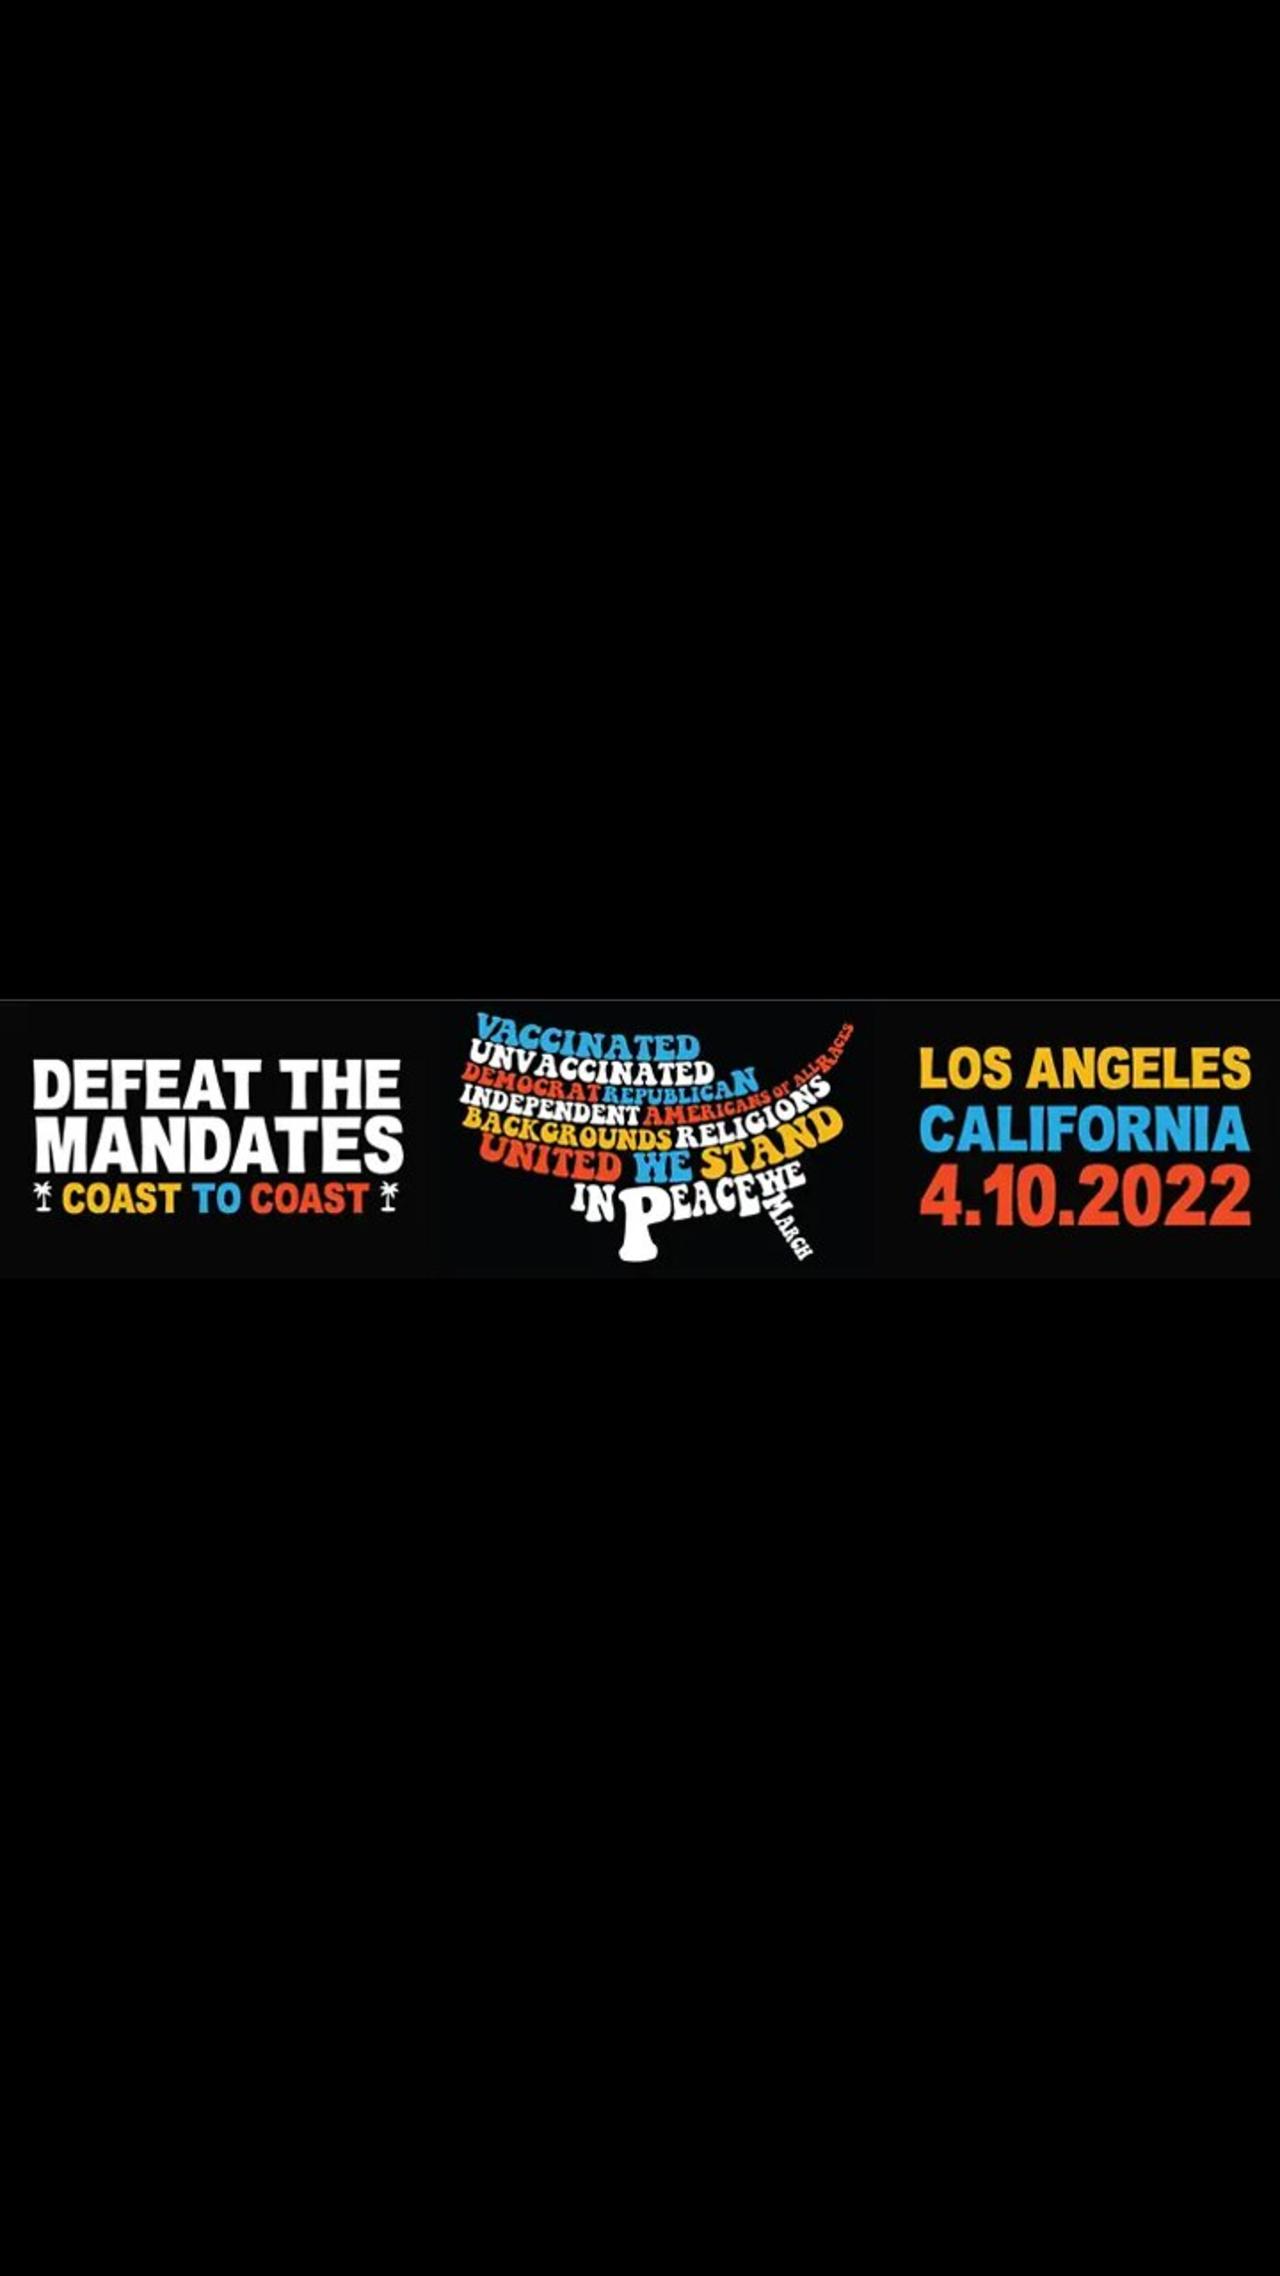 Defeat the Mandates Coverage In Los Angeles - Peoples Convoy Style - April 10th, 2022